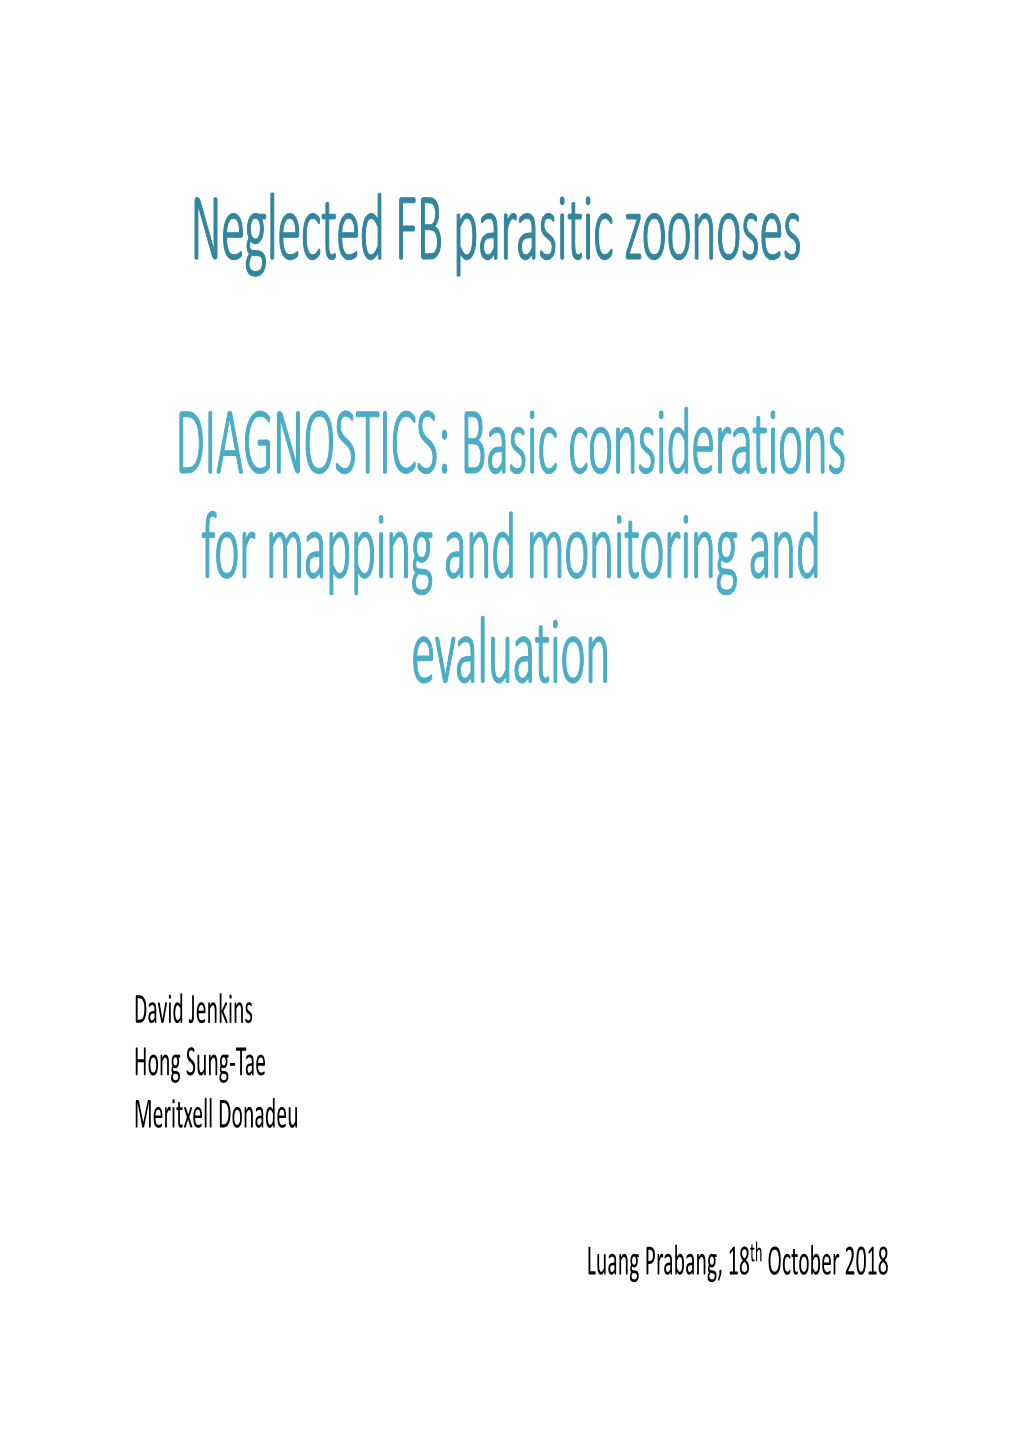 DIAGNOSTICS: Basic Considerations for Mapping and Monitoring and Evaluation